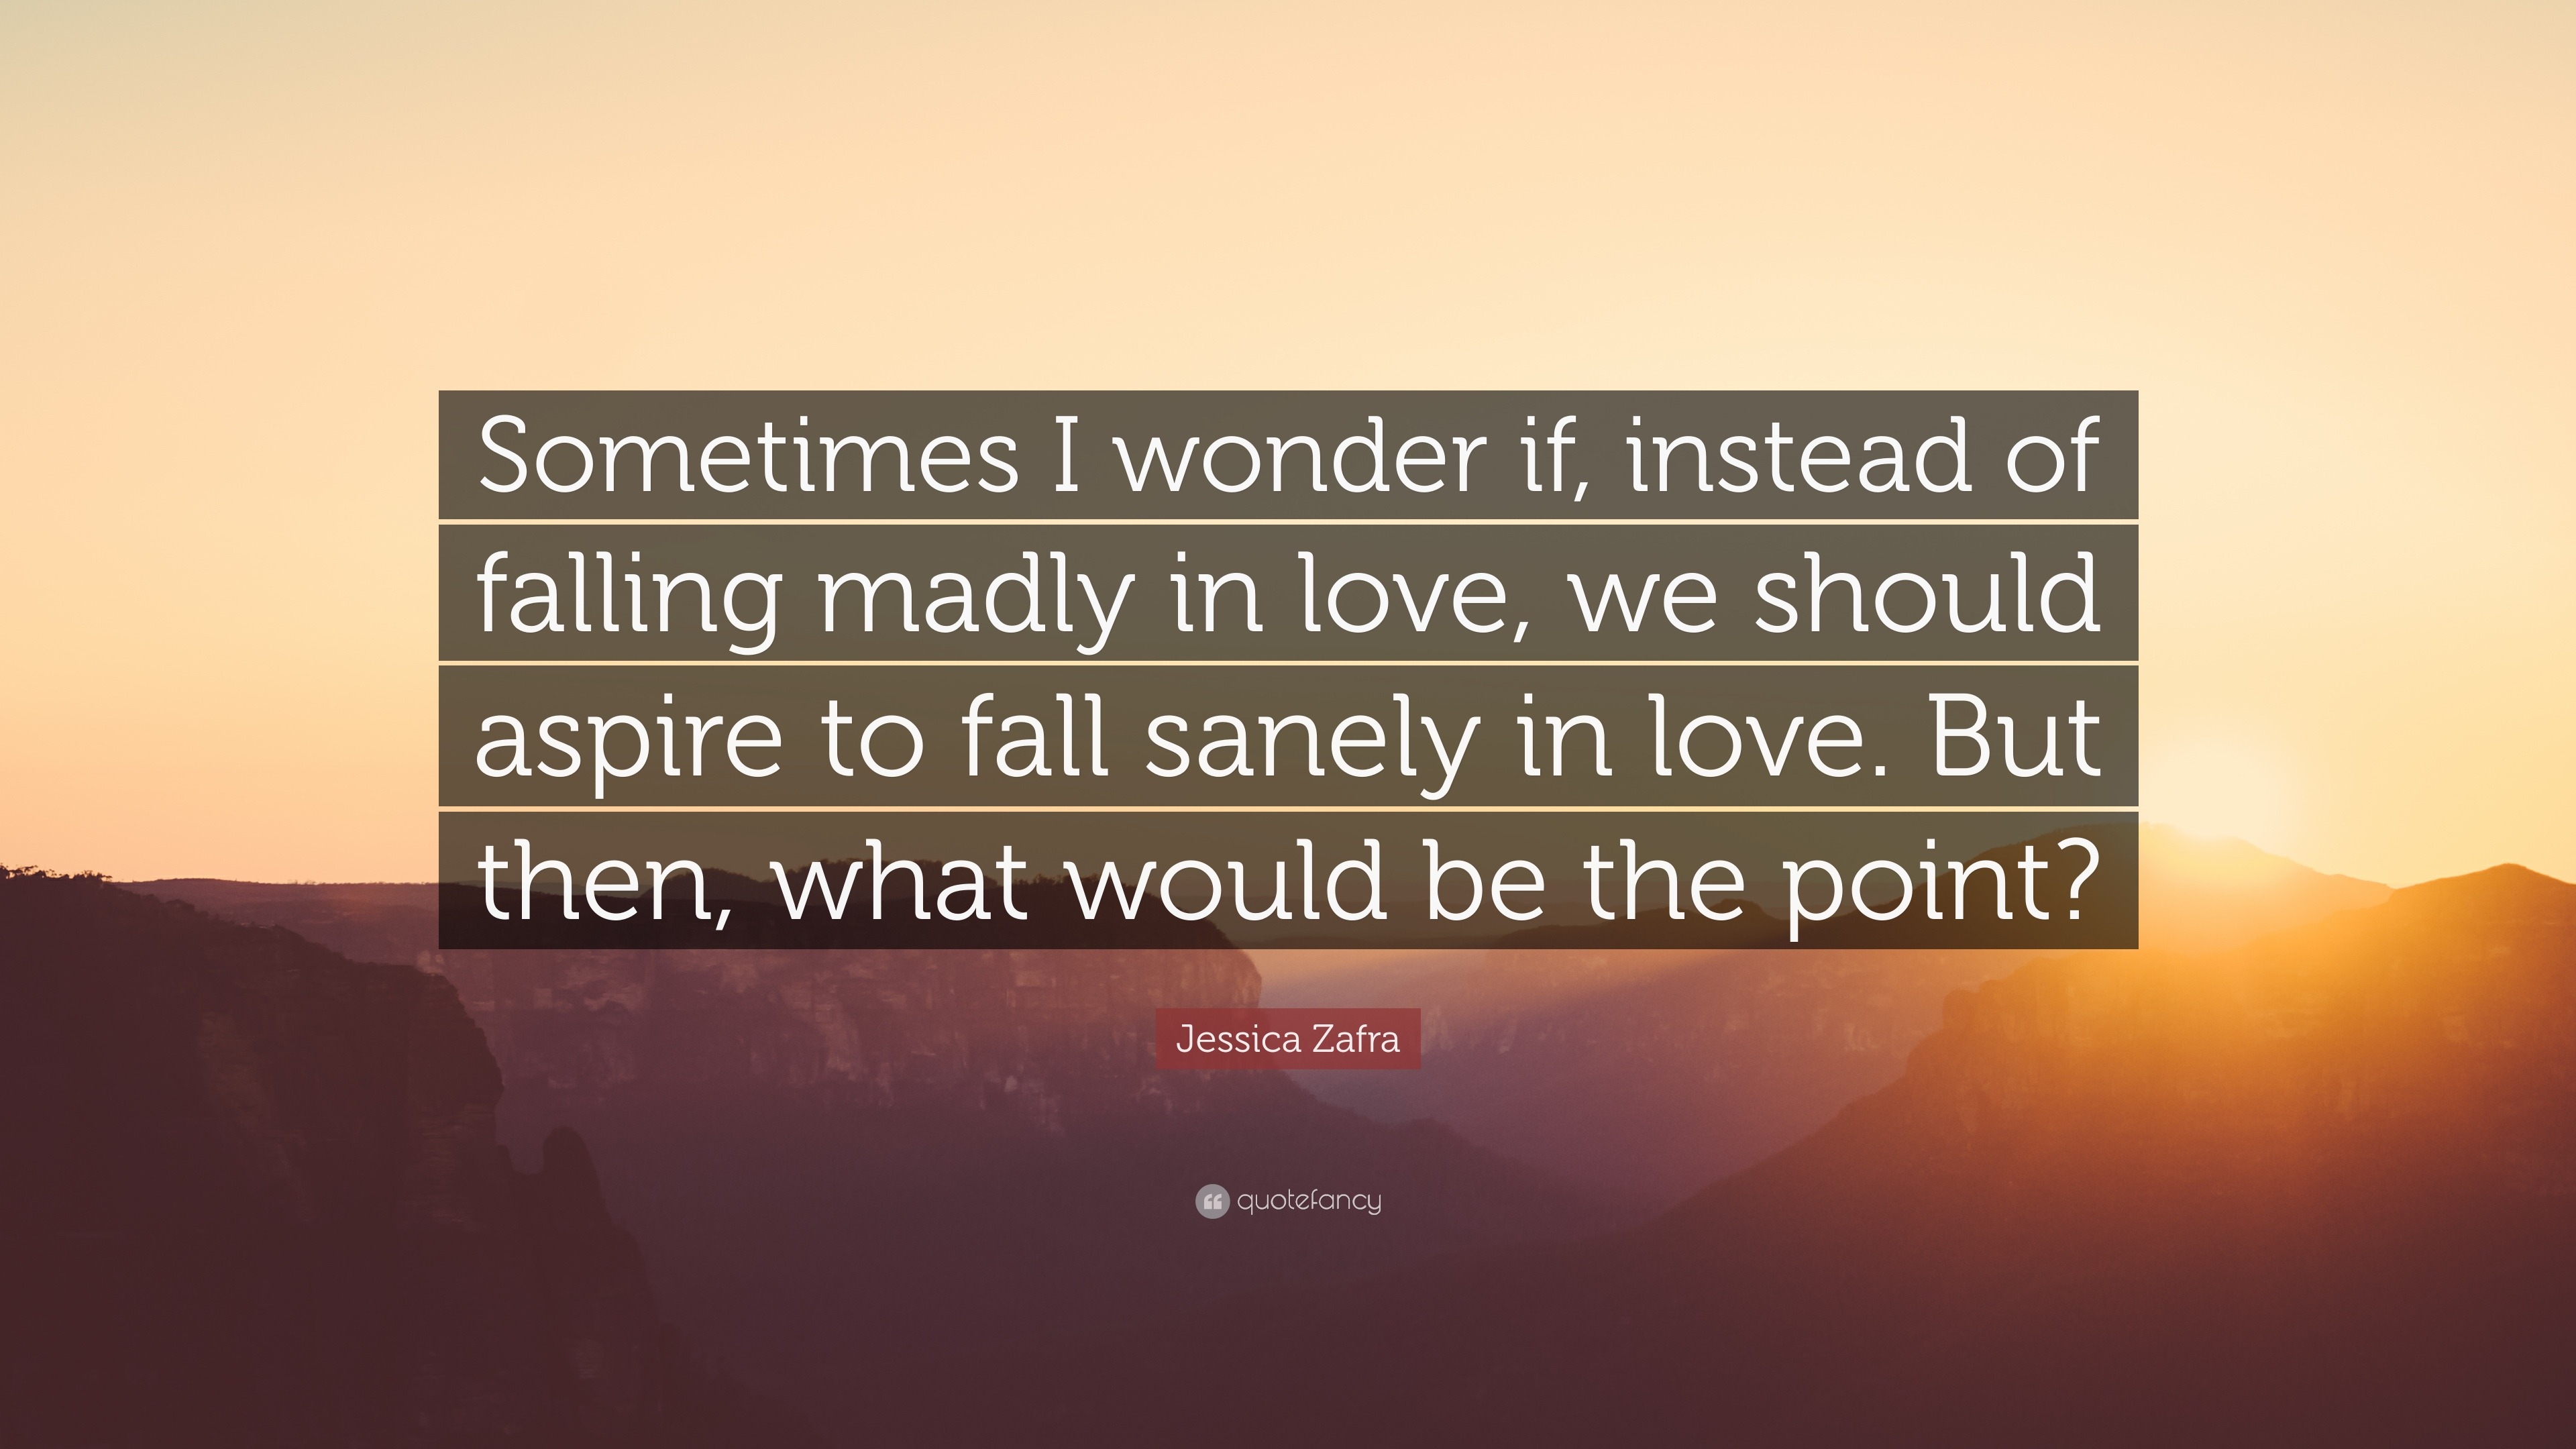 Jessica Zafra Quote “Sometimes I wonder if instead of falling madly in love